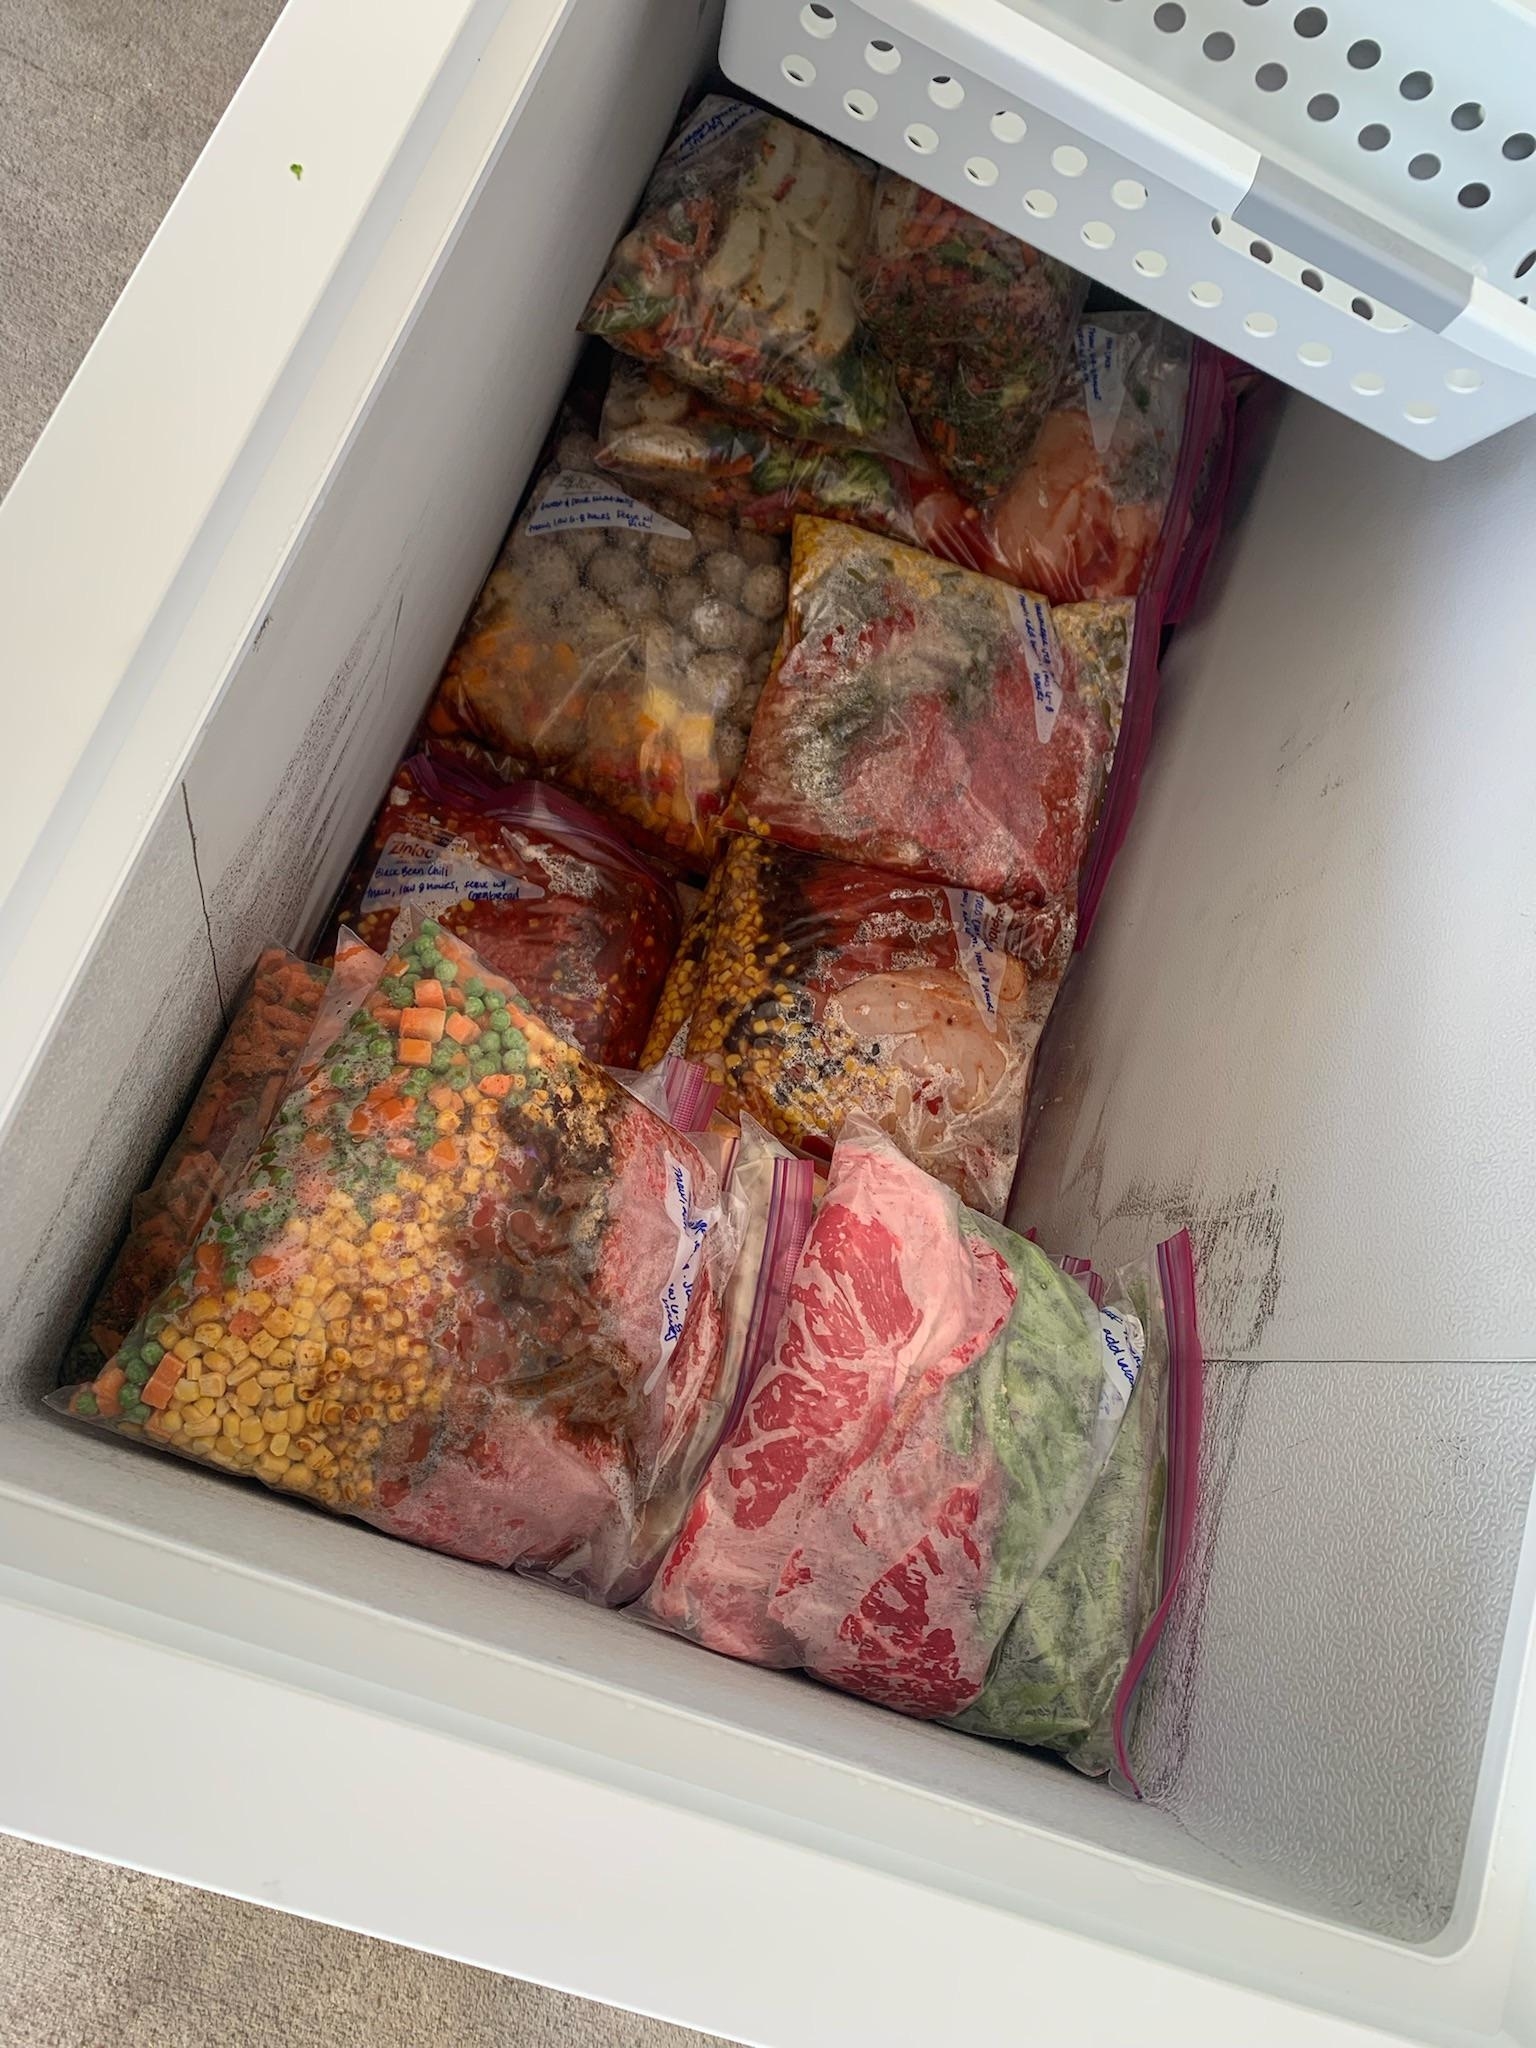 Chest freezer full of frozen meals for the slow cooker